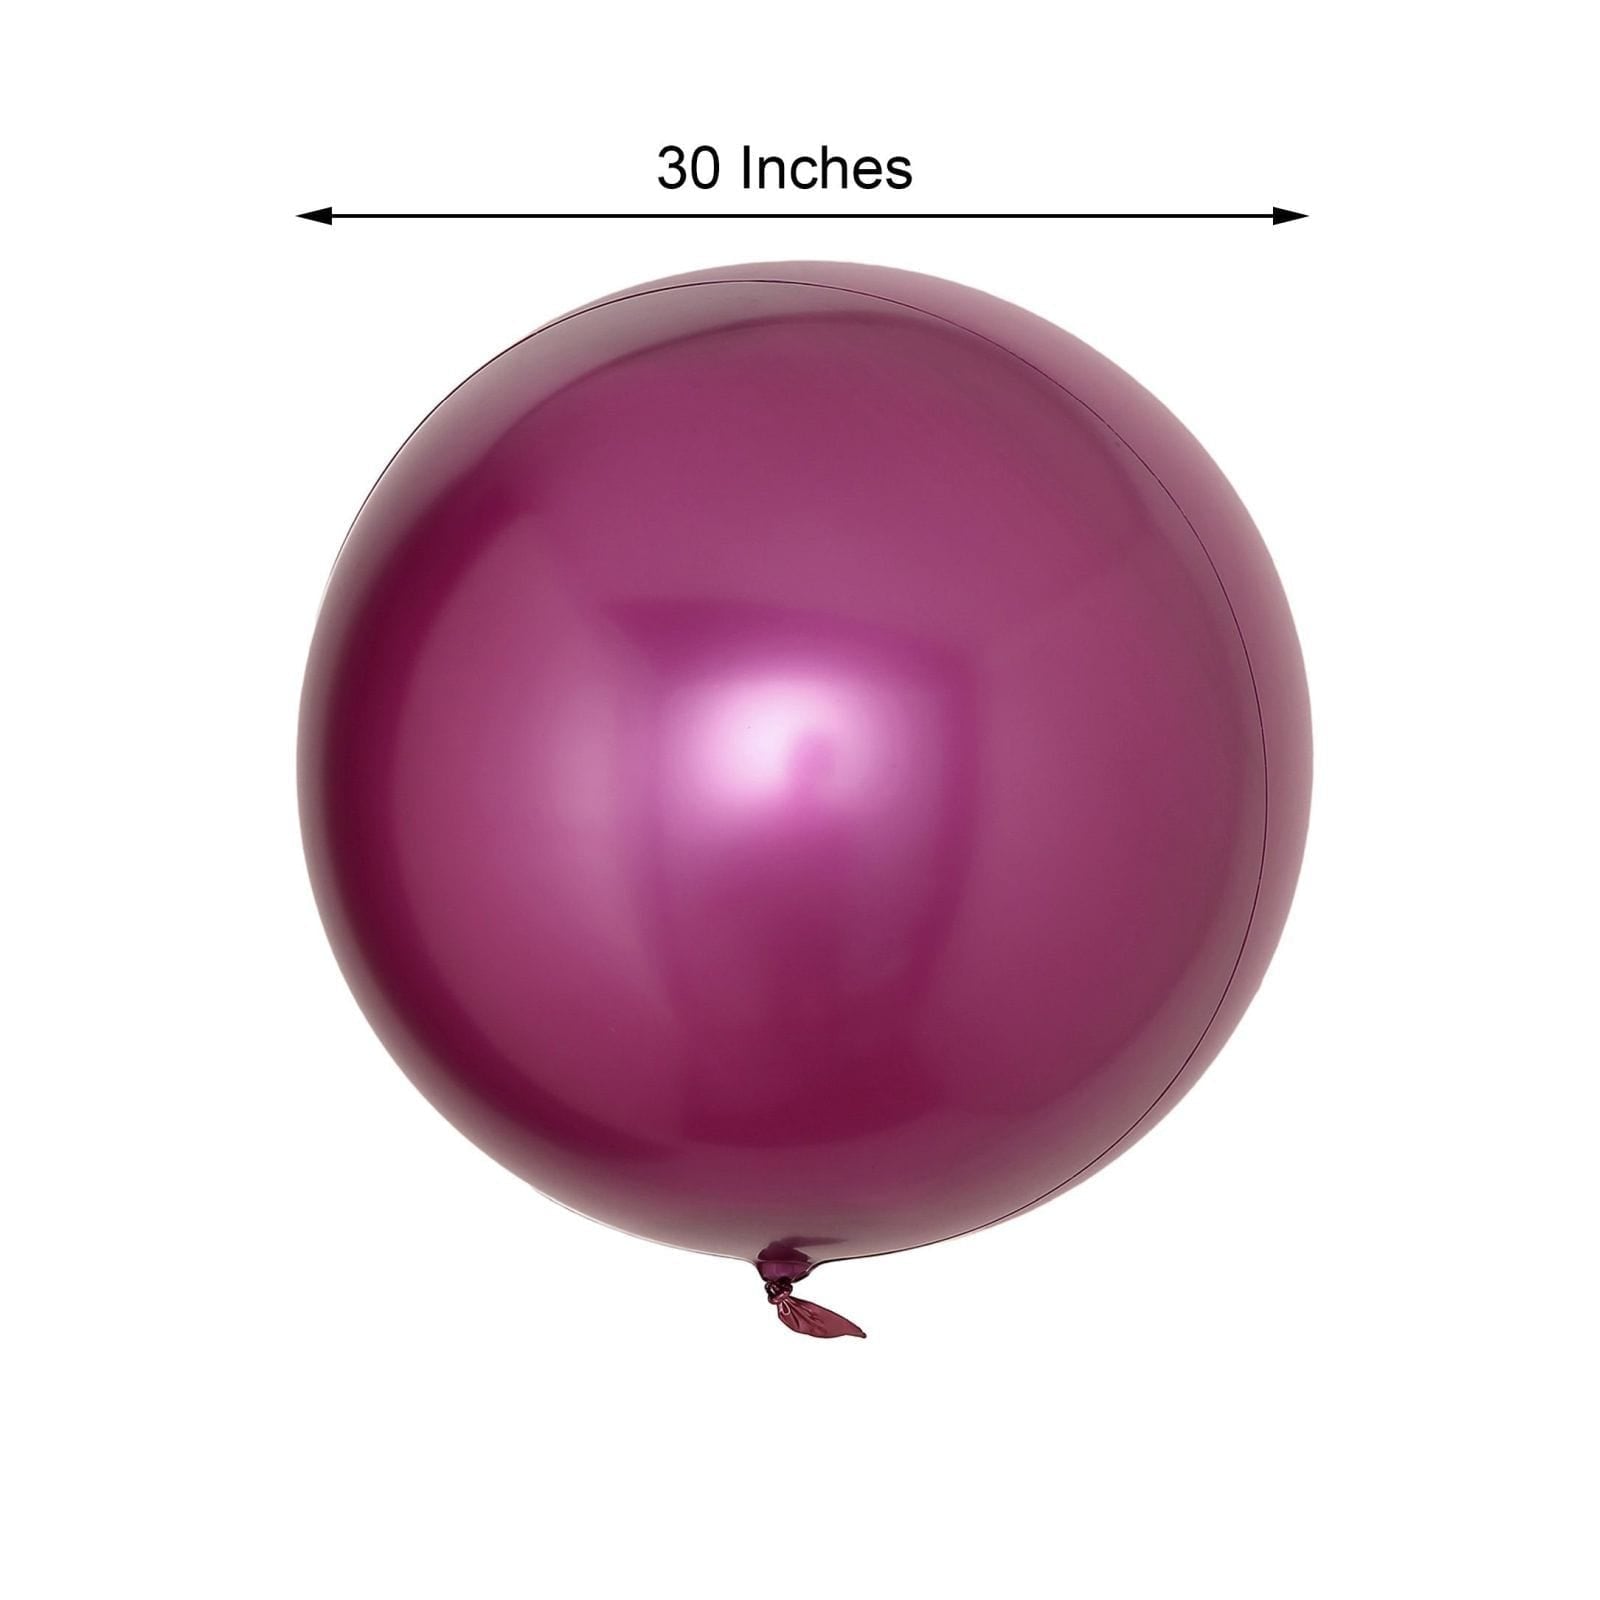 2 pcs 30 in wide Large Round Vinyl Balloons